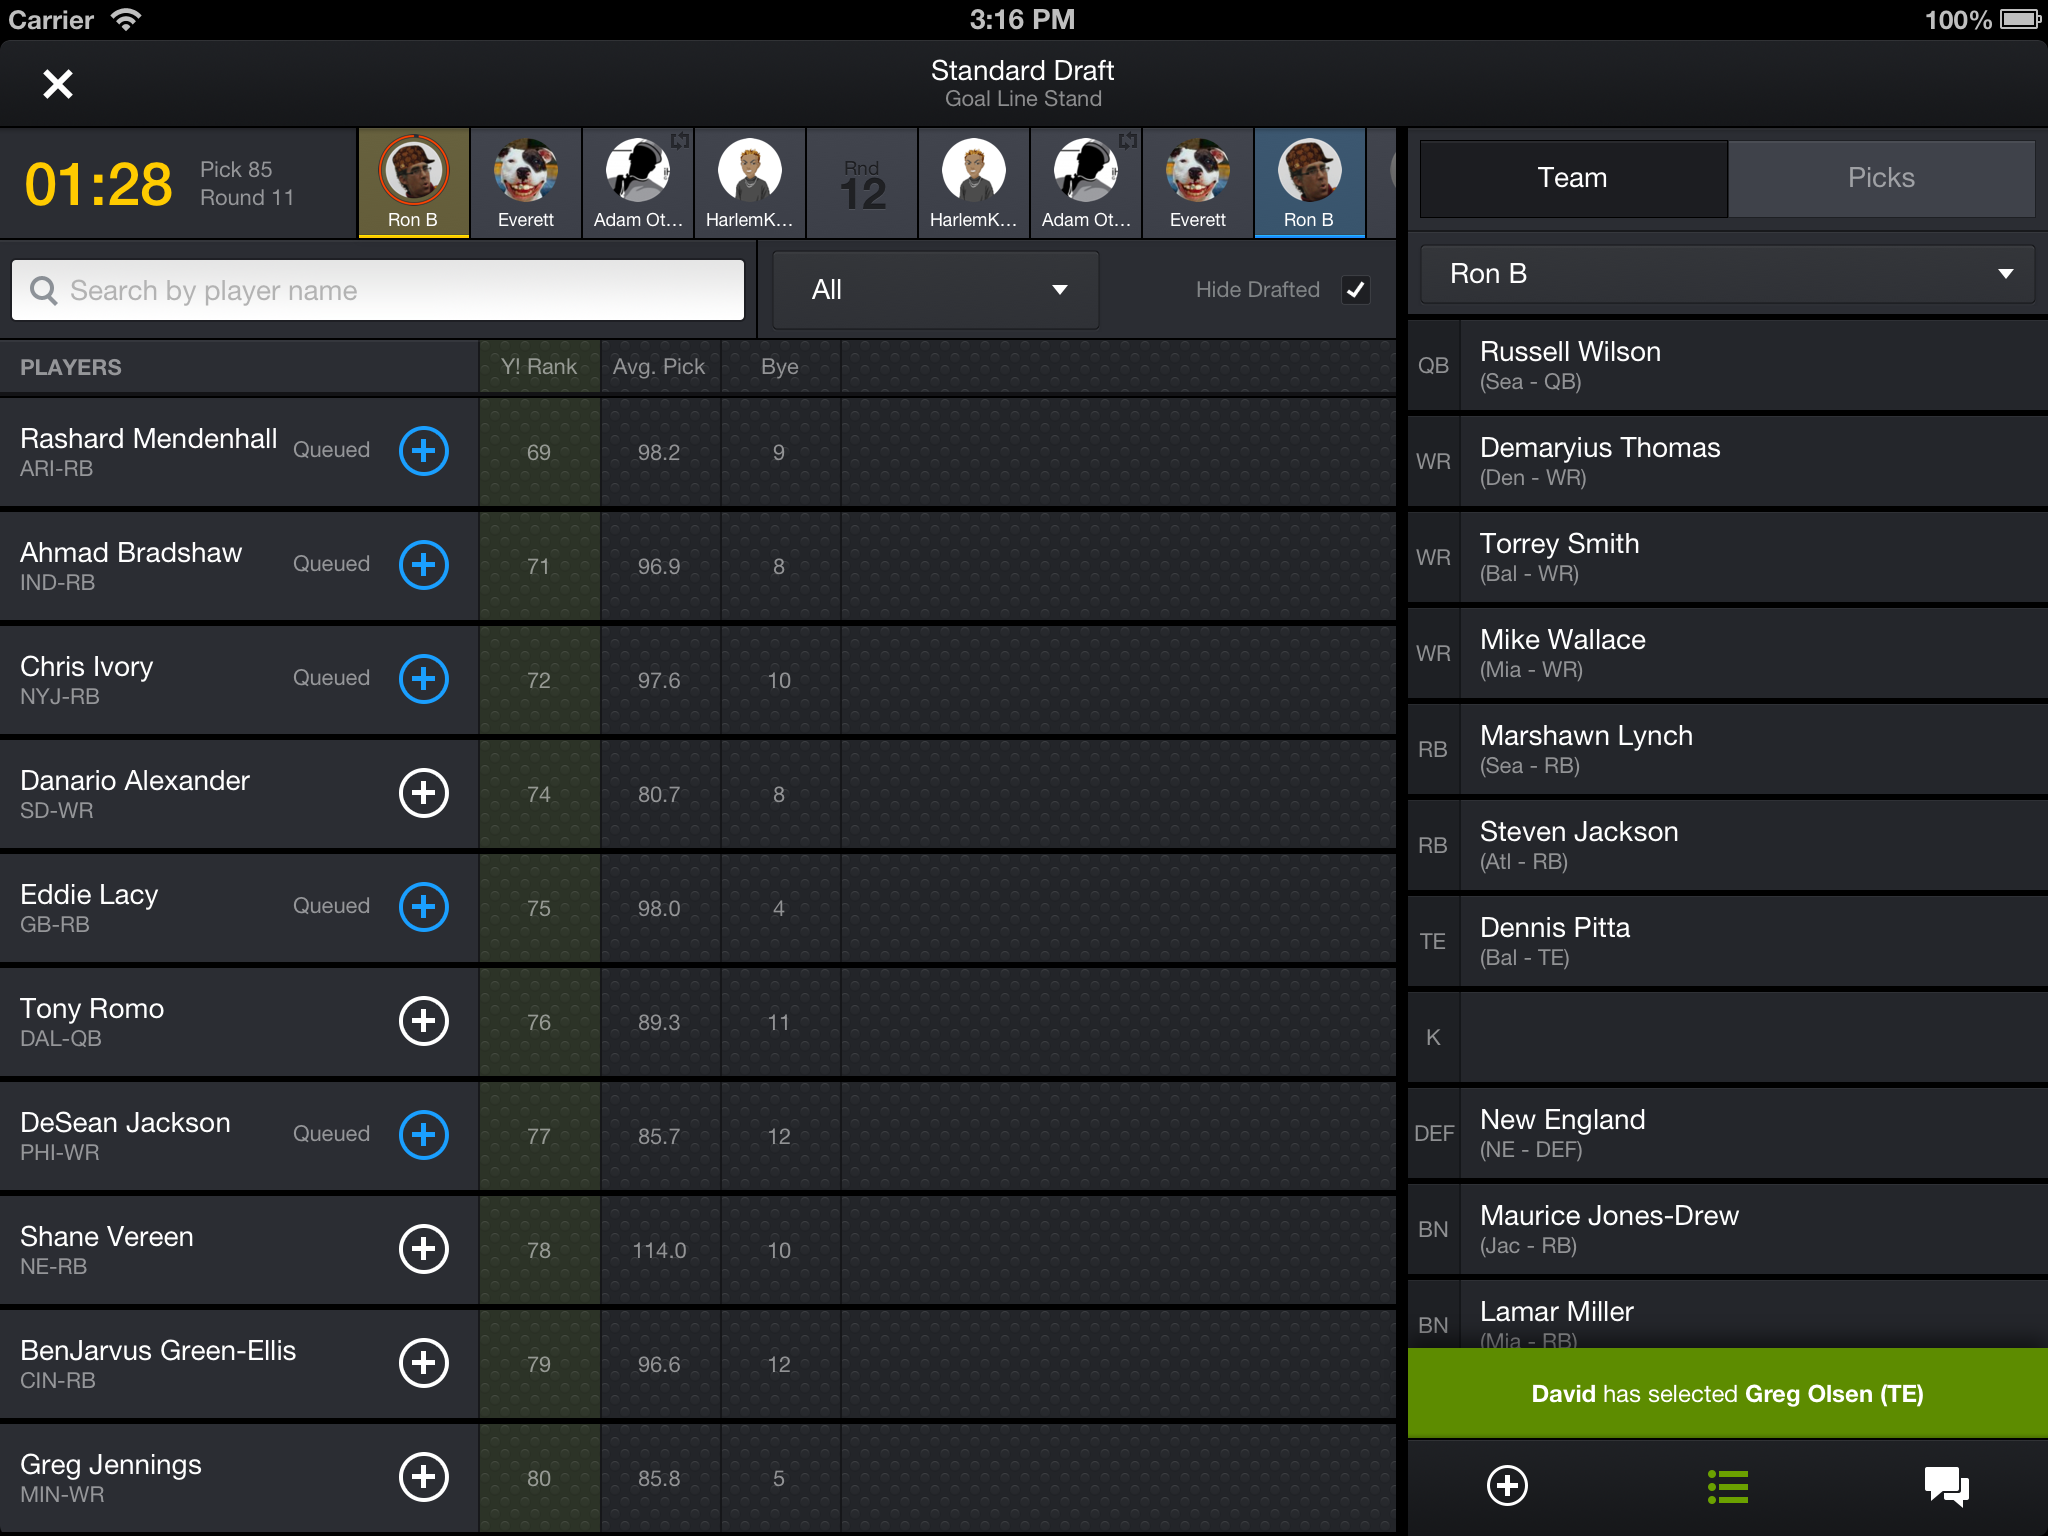 Yahoo! Fantasy Football App Completely Redesigned, Brings Mobile Draft Support